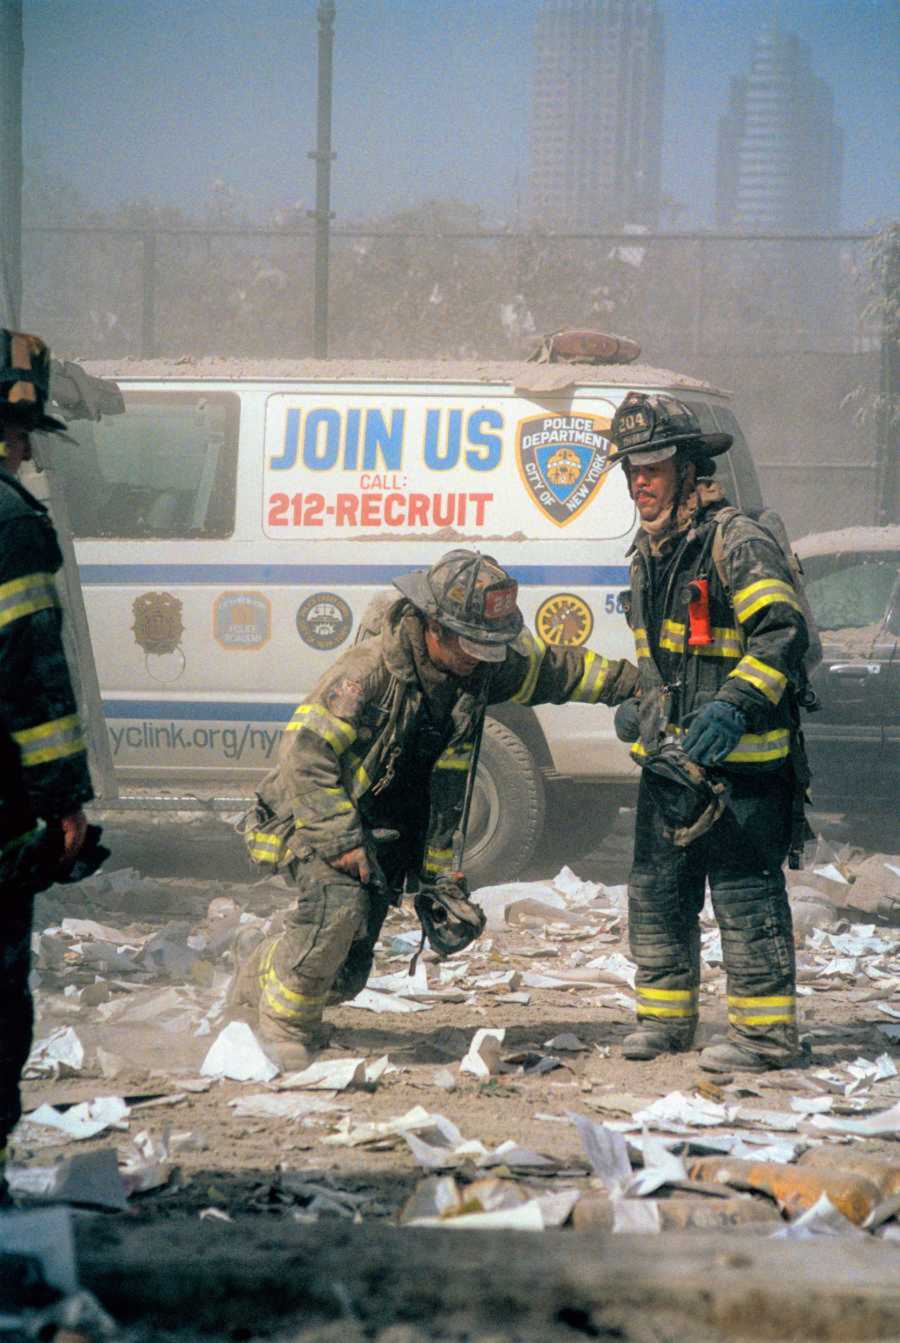 A fireman assists another firefighter as they stand in the debris of the crash